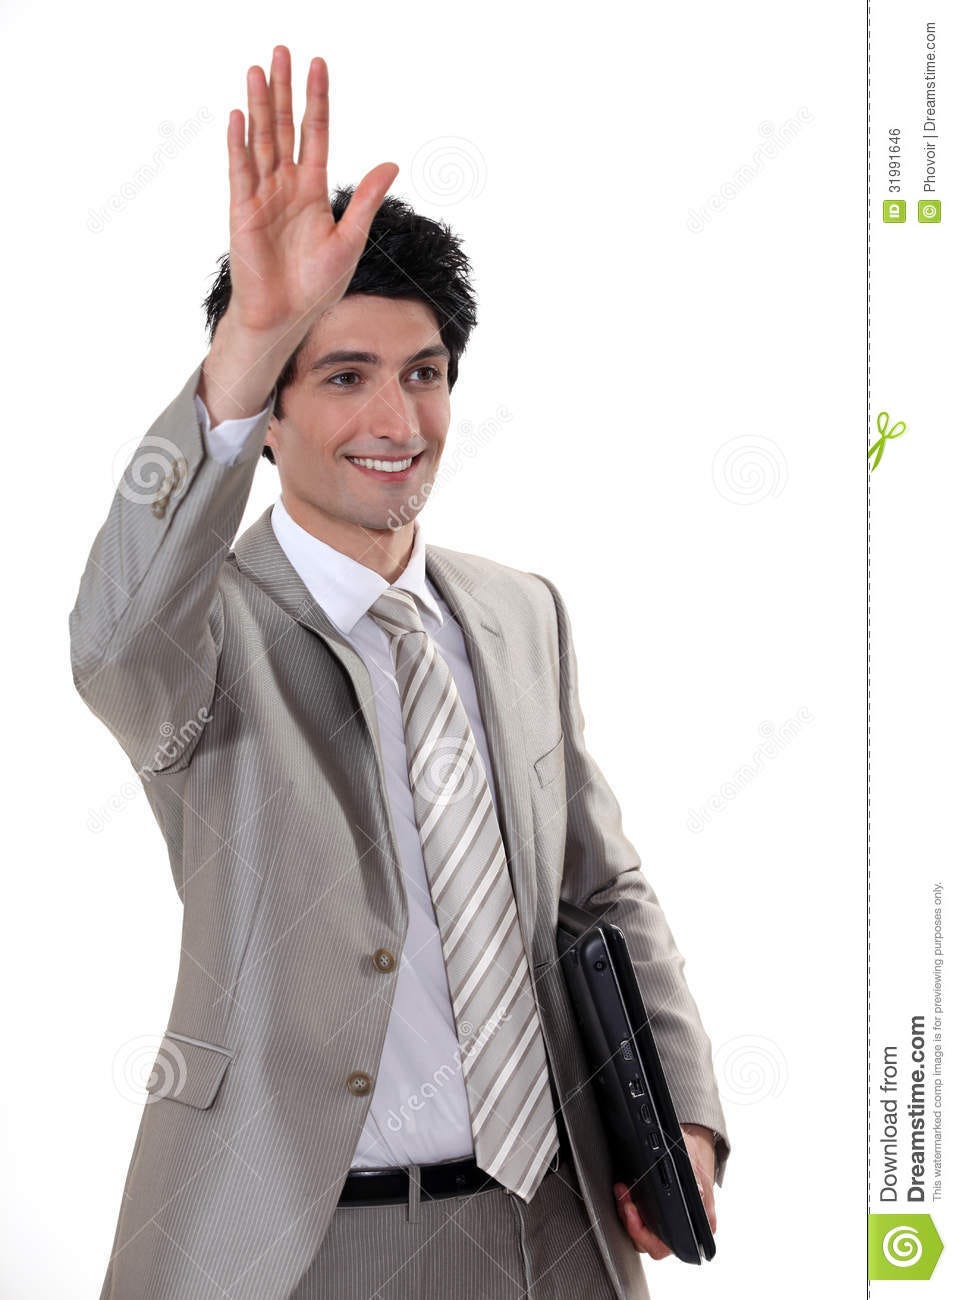 Image result for waving stock image